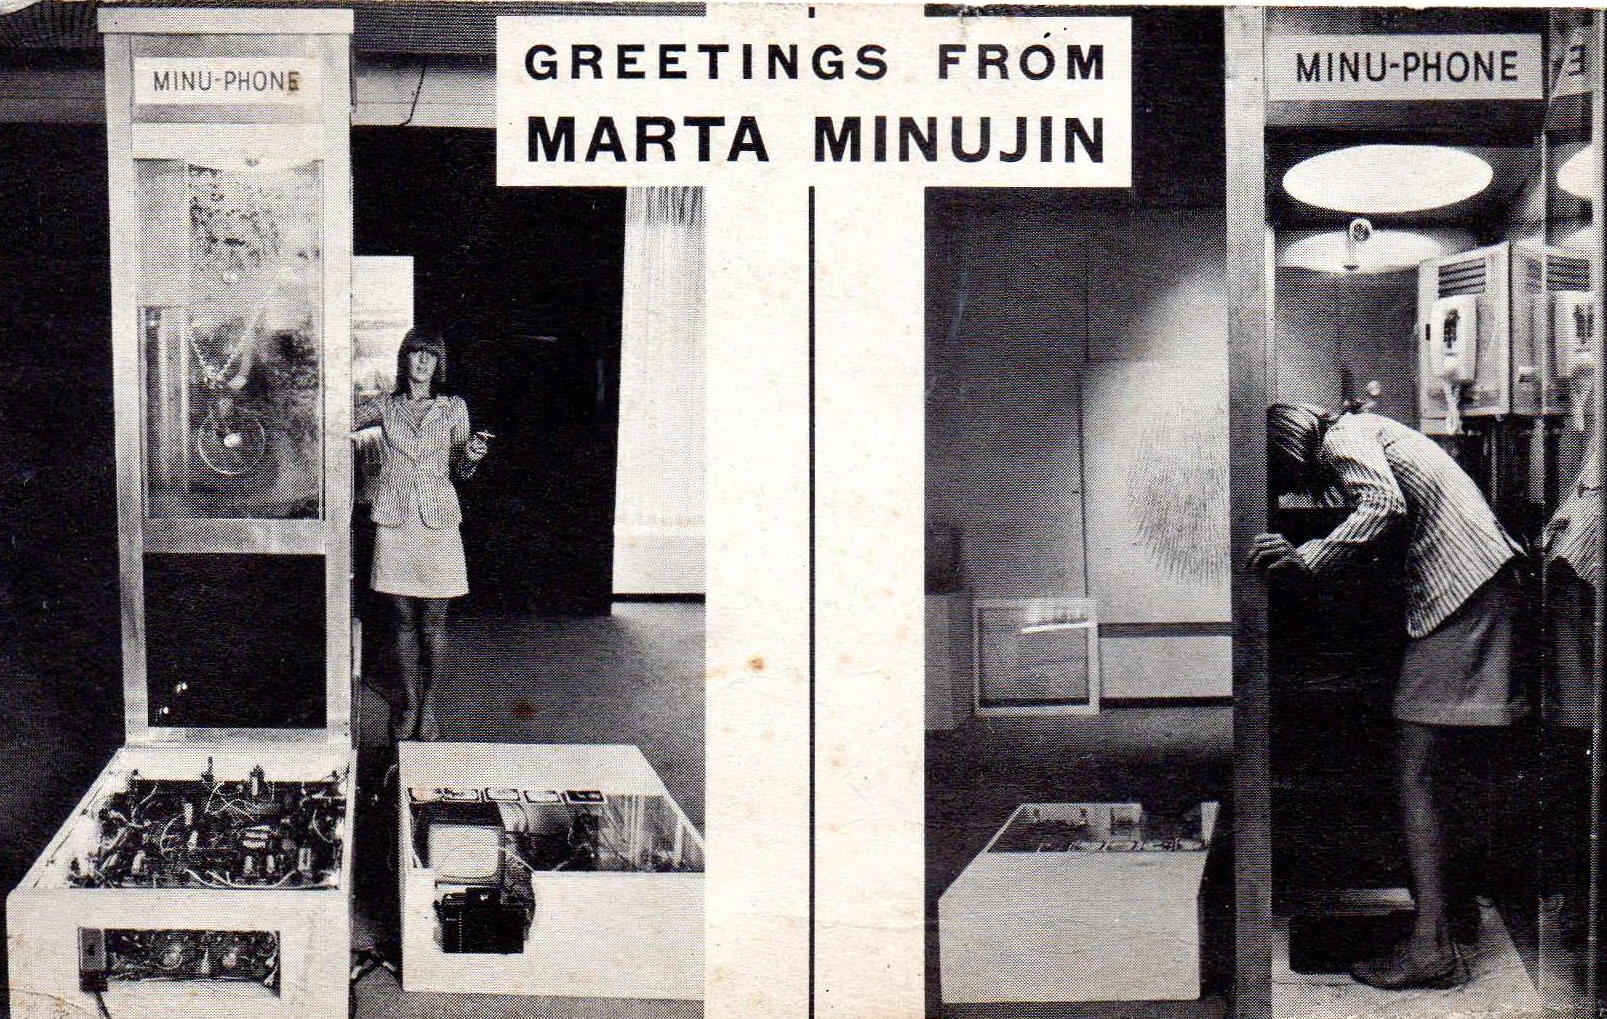 Postcard from 1969 featuring Minuphone (1967)